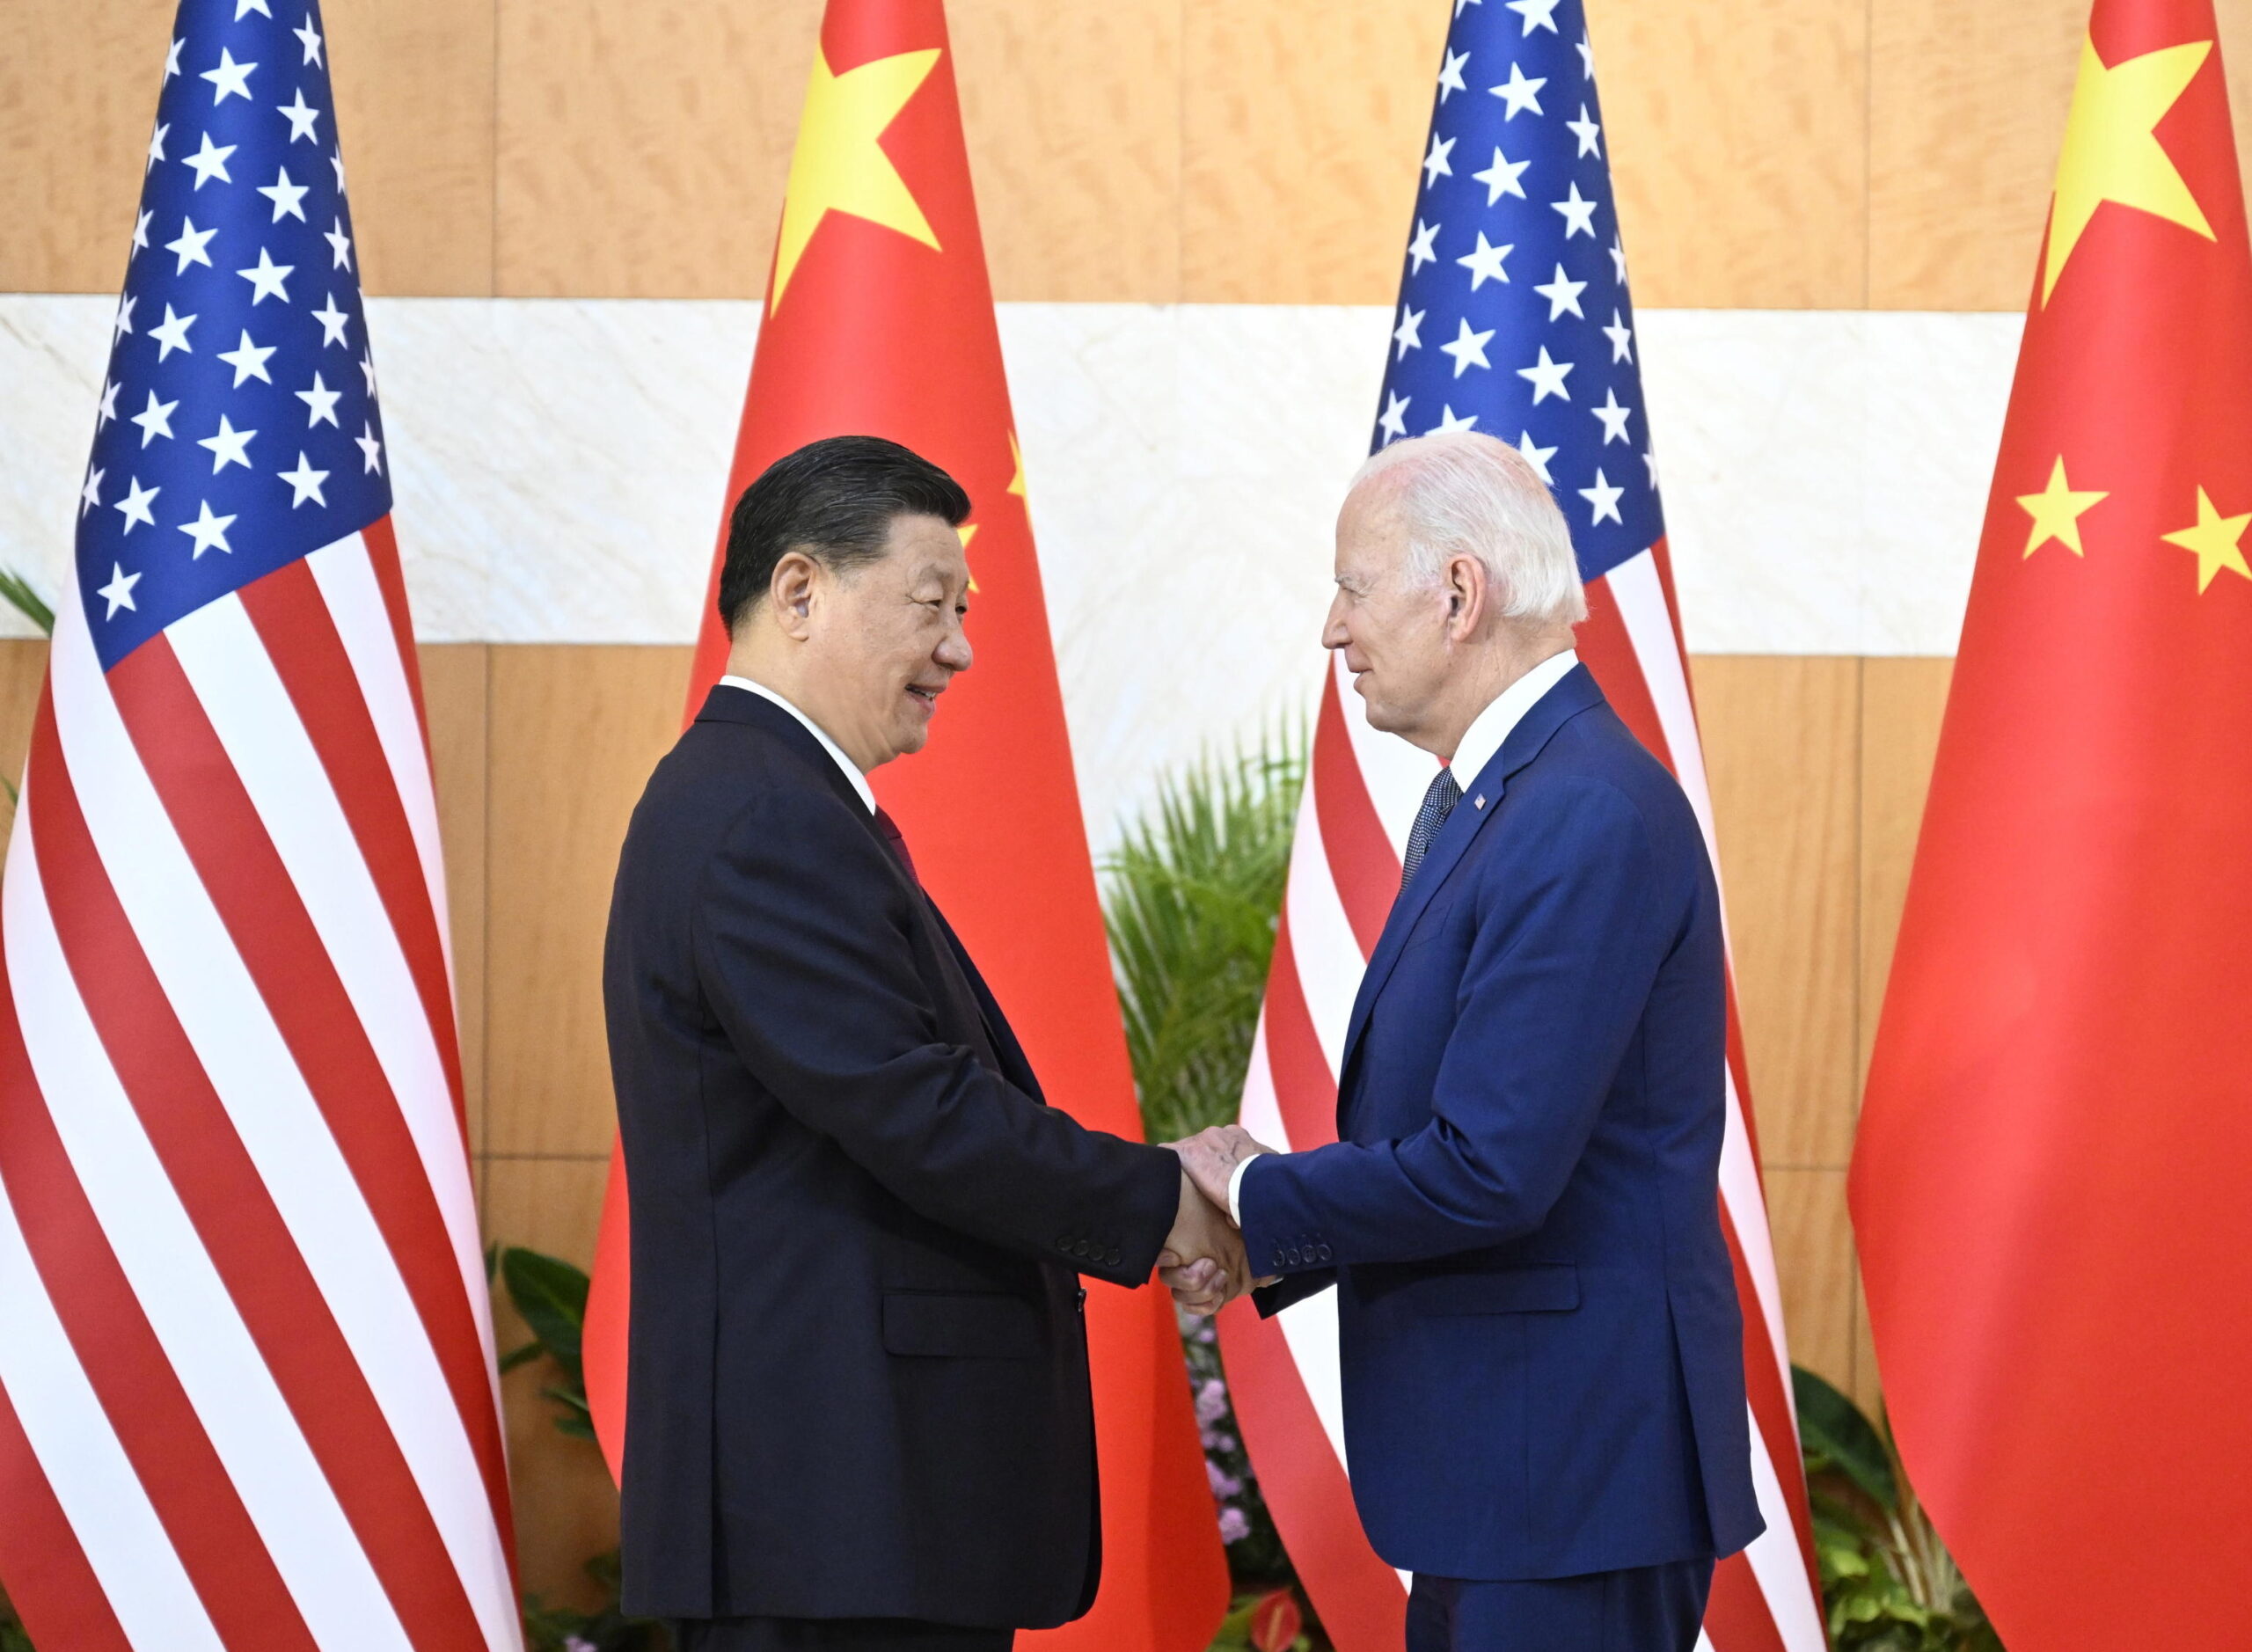 epa10305492 Chinese President Xi Jinping (L) greets his US counterpart Joe Biden before their meeting, one day ahead of the G20 Summit in Bali, Indonesia, 14 November 2022. The 17th Group of Twenty (G20) Heads of State and Government Summit will be held in Bali from 15 to 16 November 2022.  EPA/XINHUA /LI XUEREN CHINA OUT / MANDATORY CREDIT  EDITORIAL USE ONLY